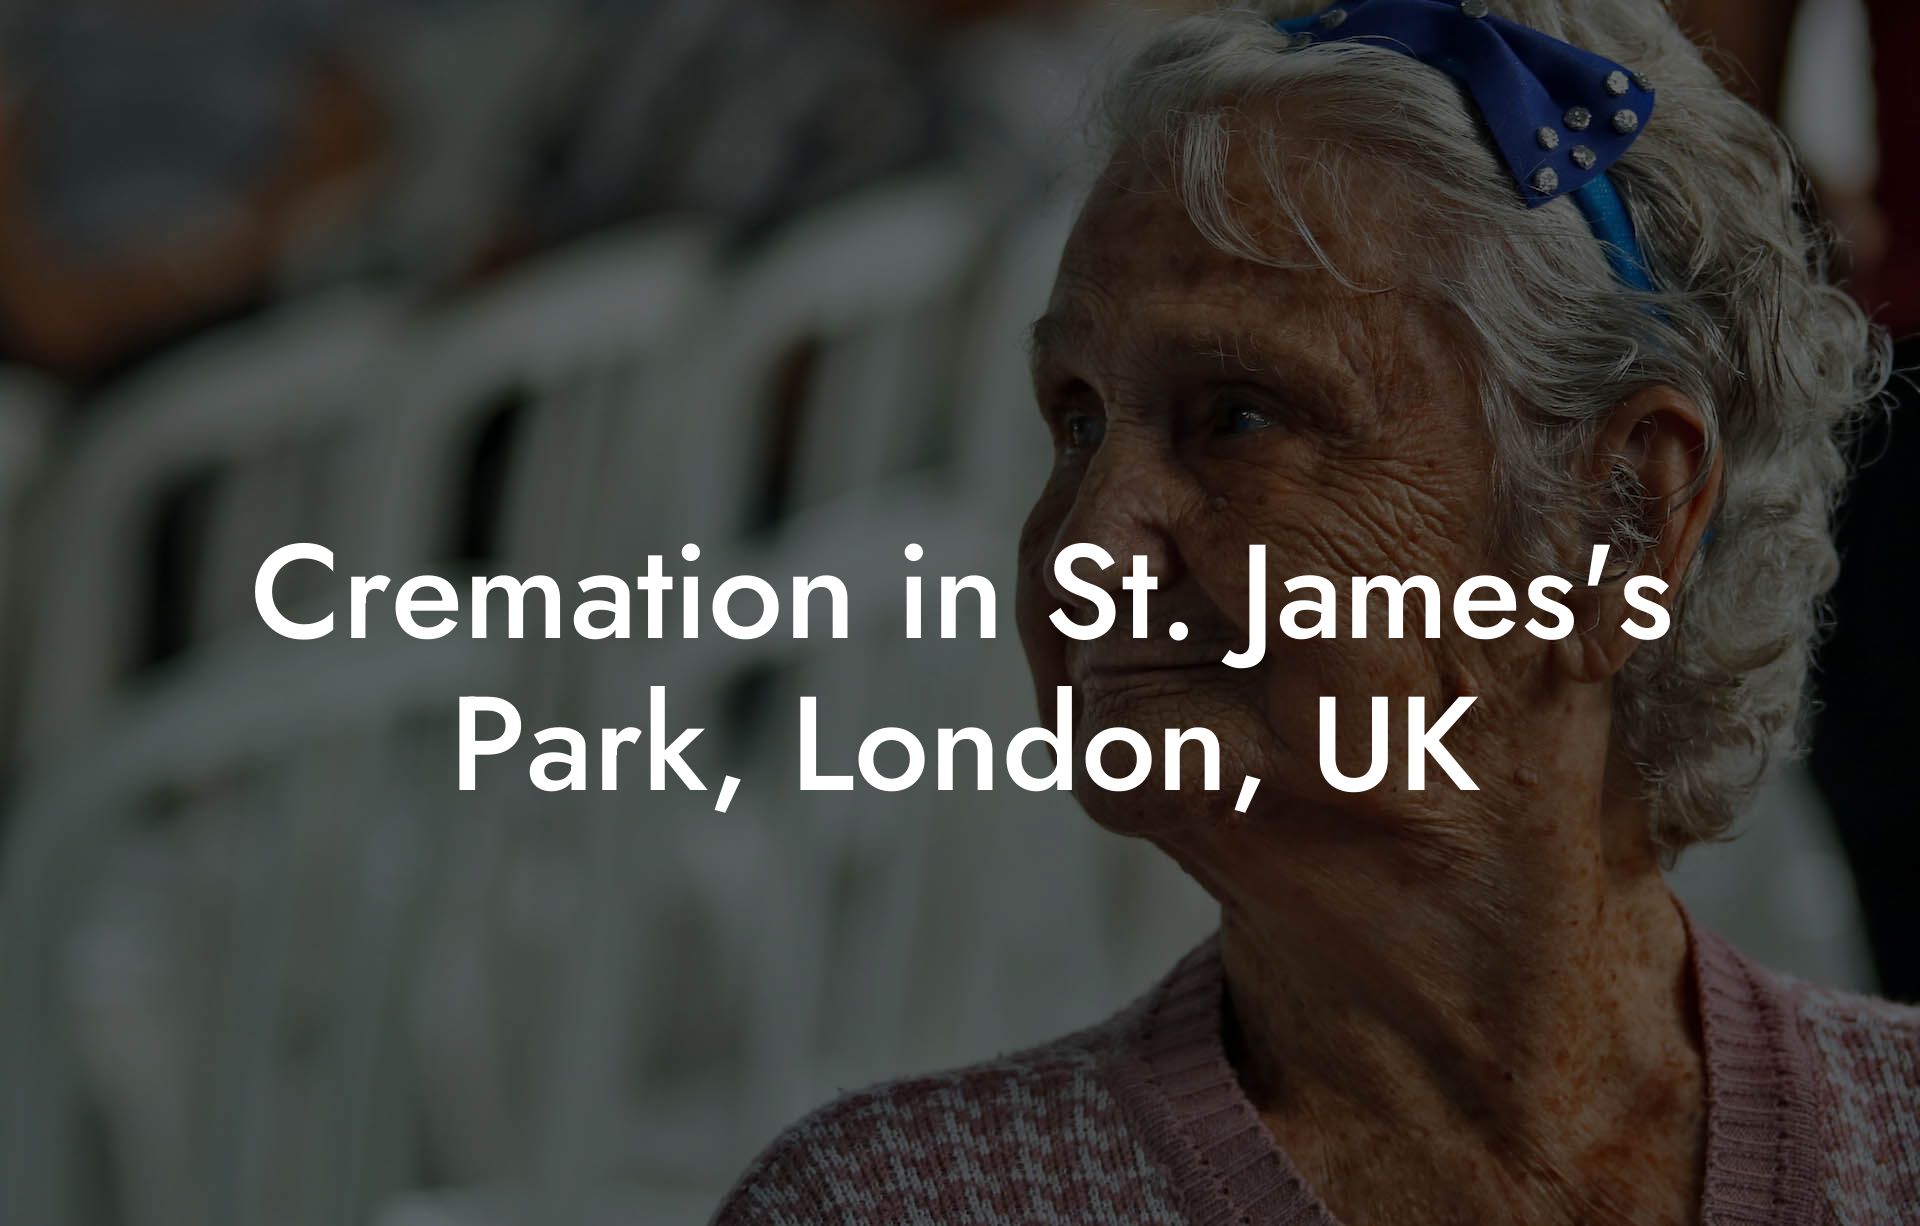 Cremation in St. James's Park, London, UK